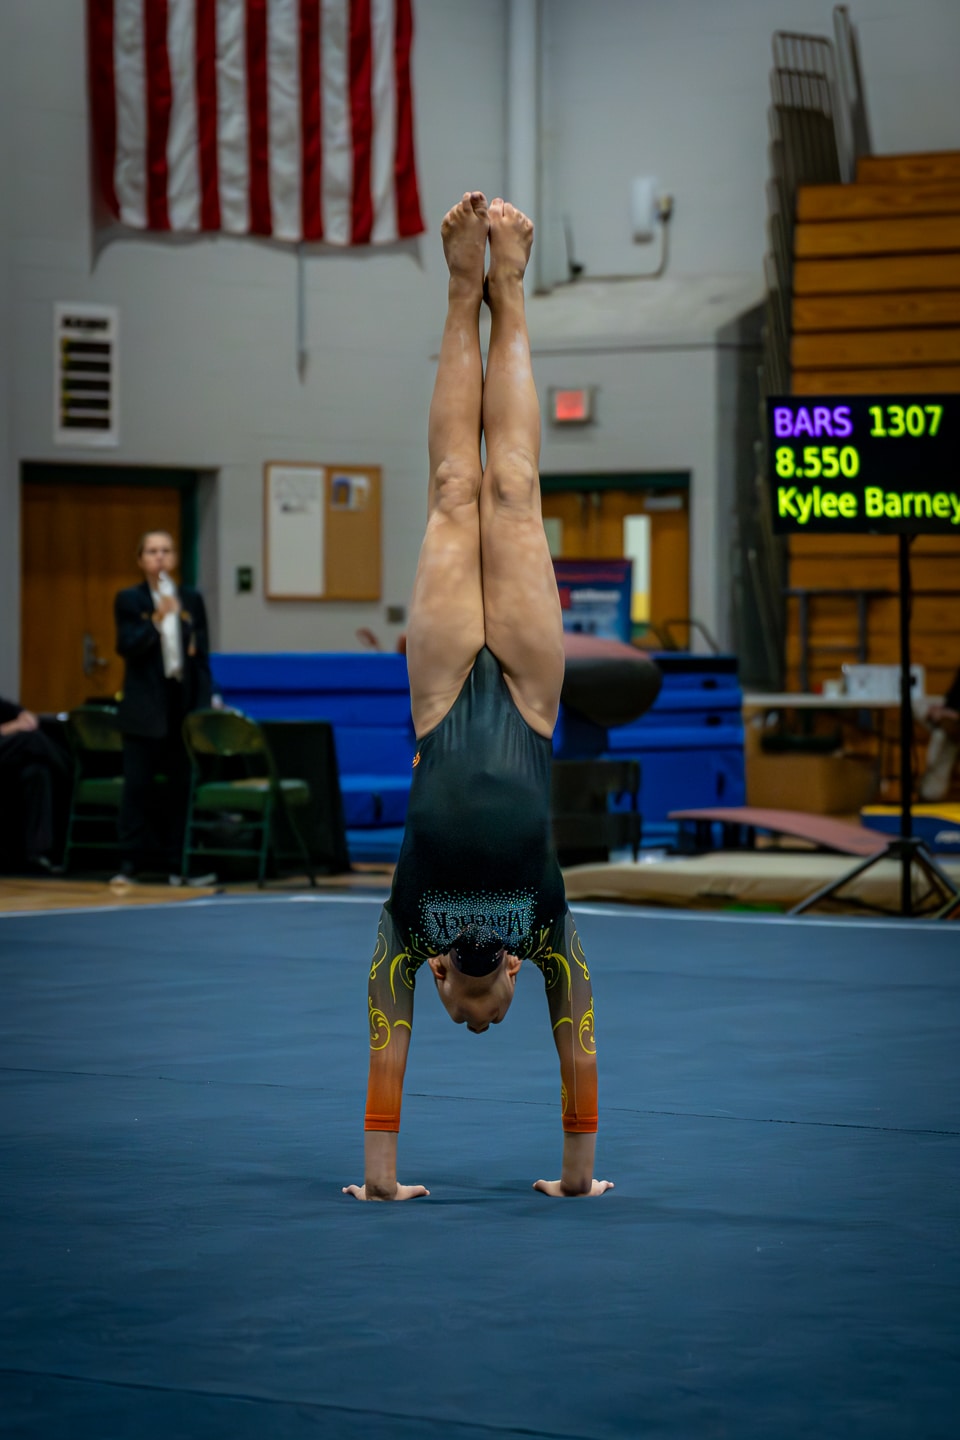 Gymnast performing a handstand at a gymnastics event, with the American flag in the background.